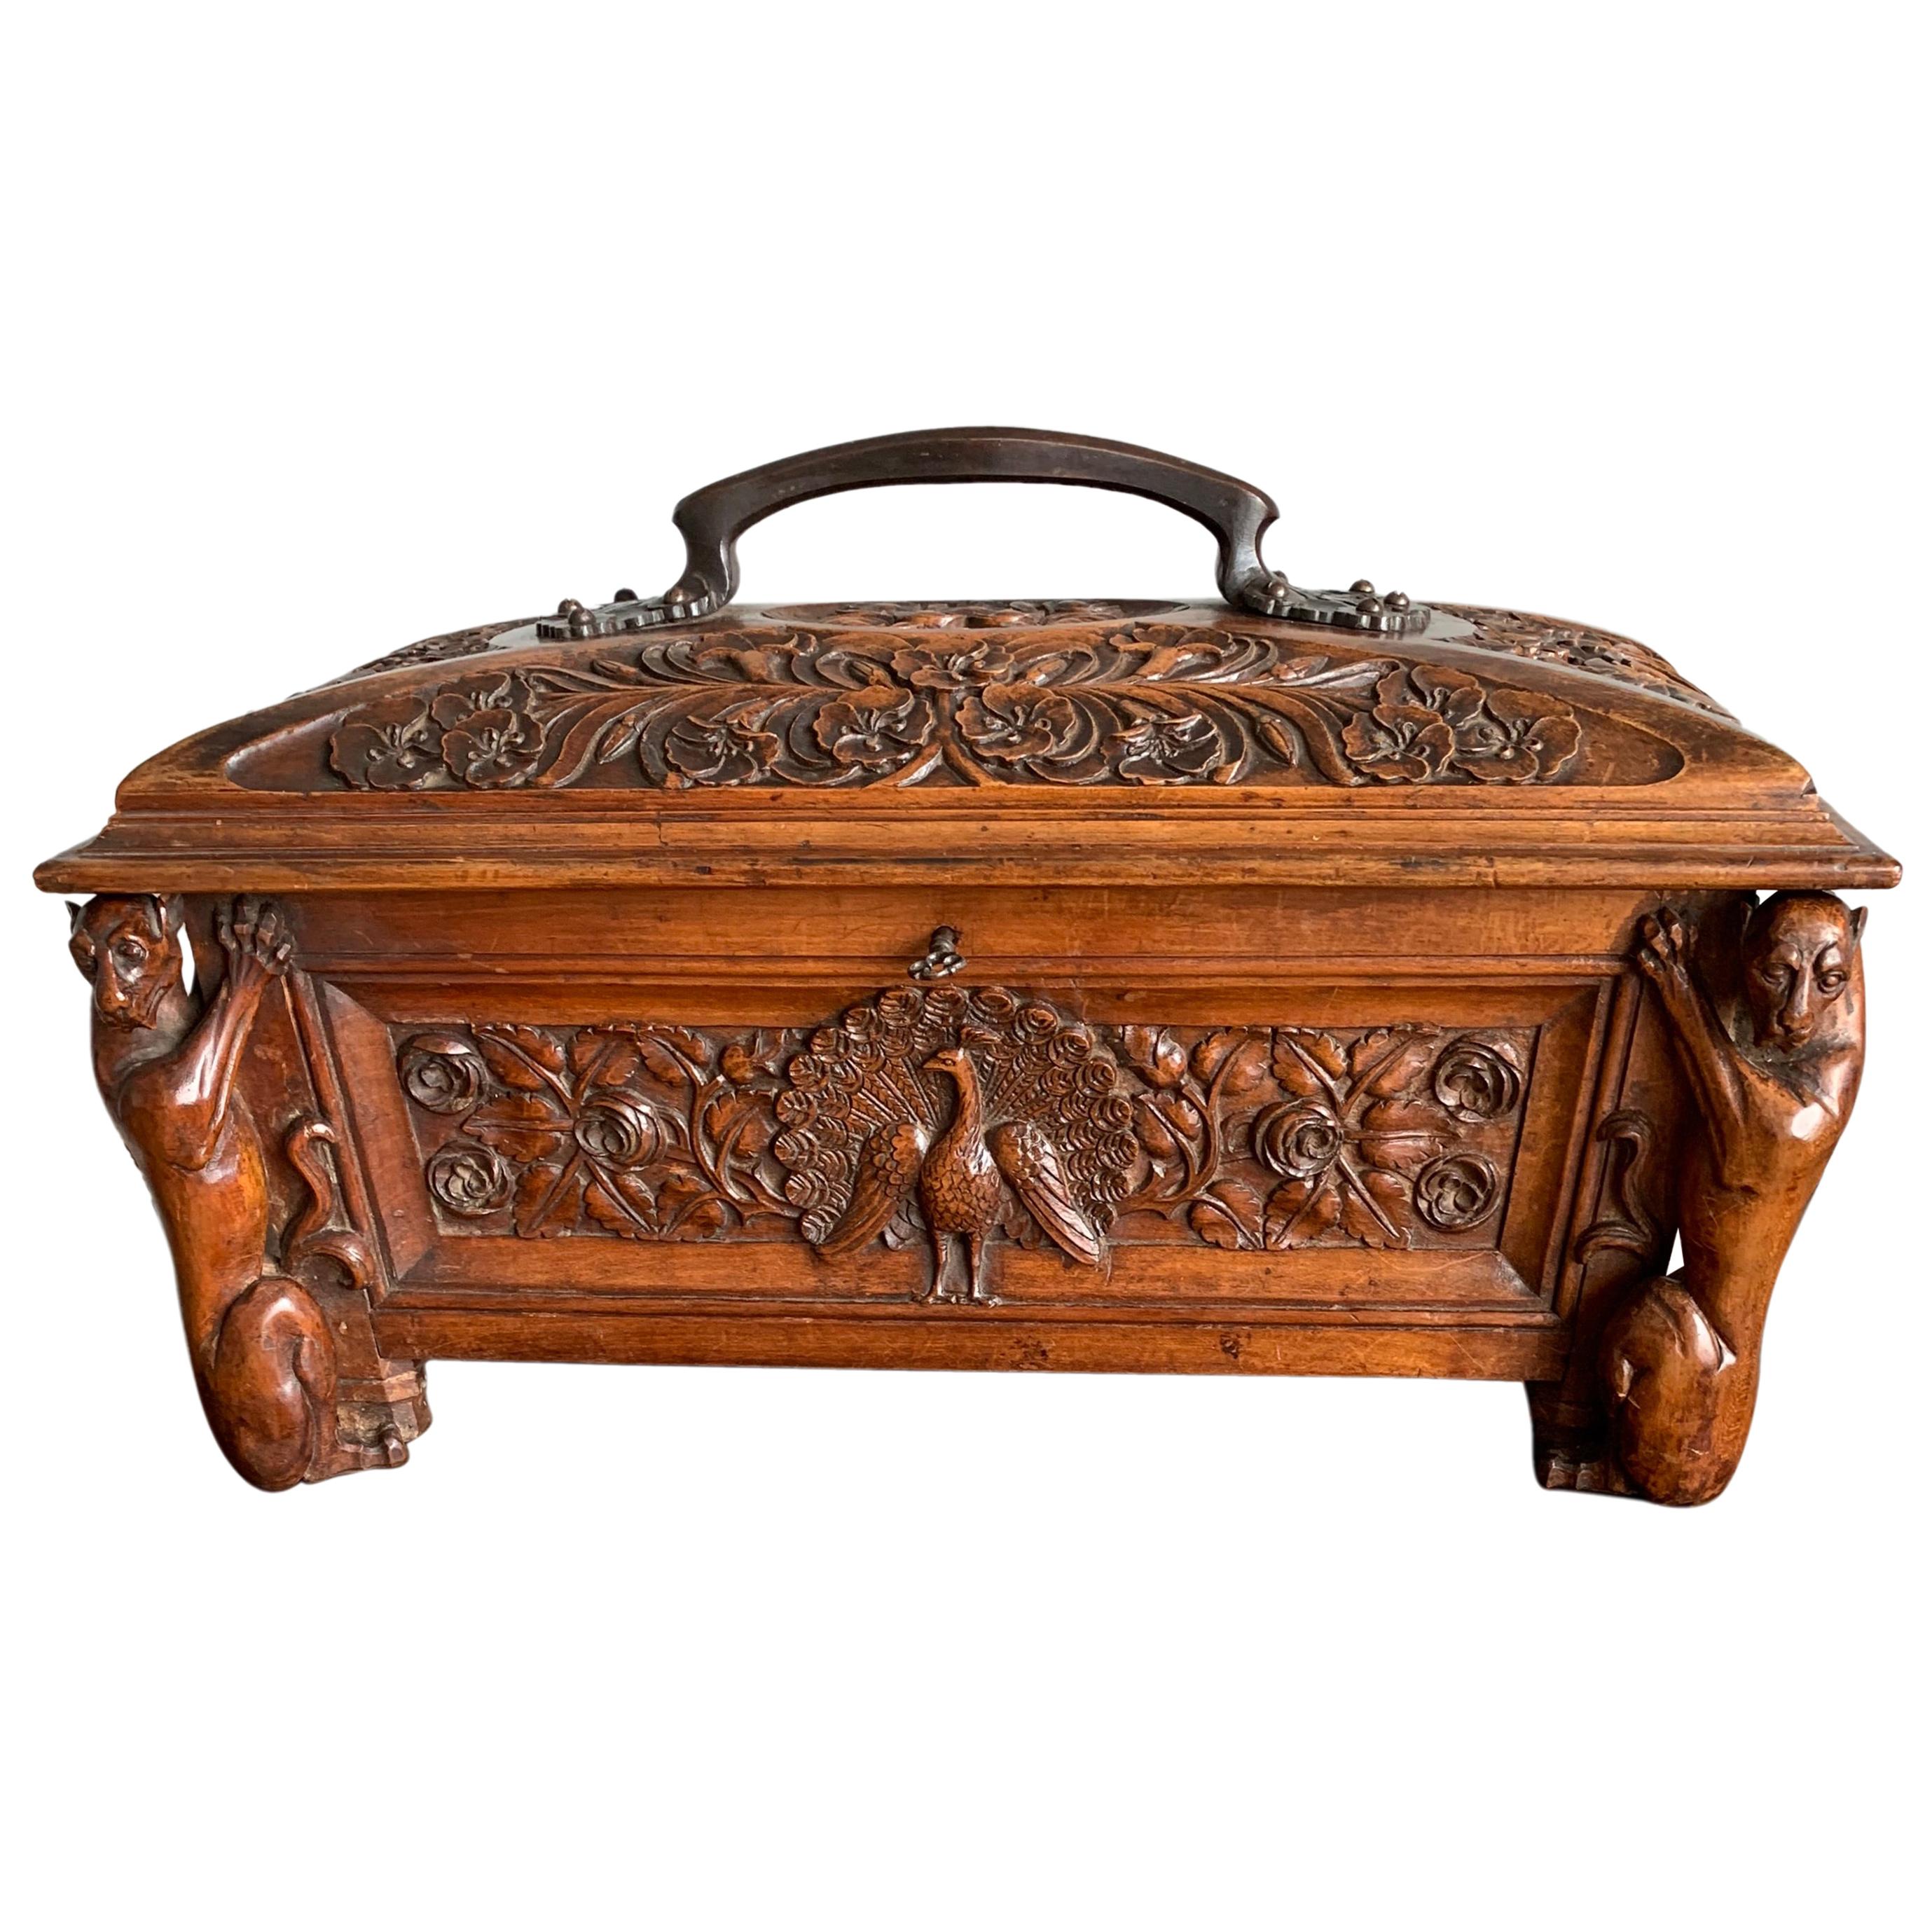 Stunning Handcrafted Late 1800s Gothic Casket with Peacock & Gargoyle Sculptures For Sale